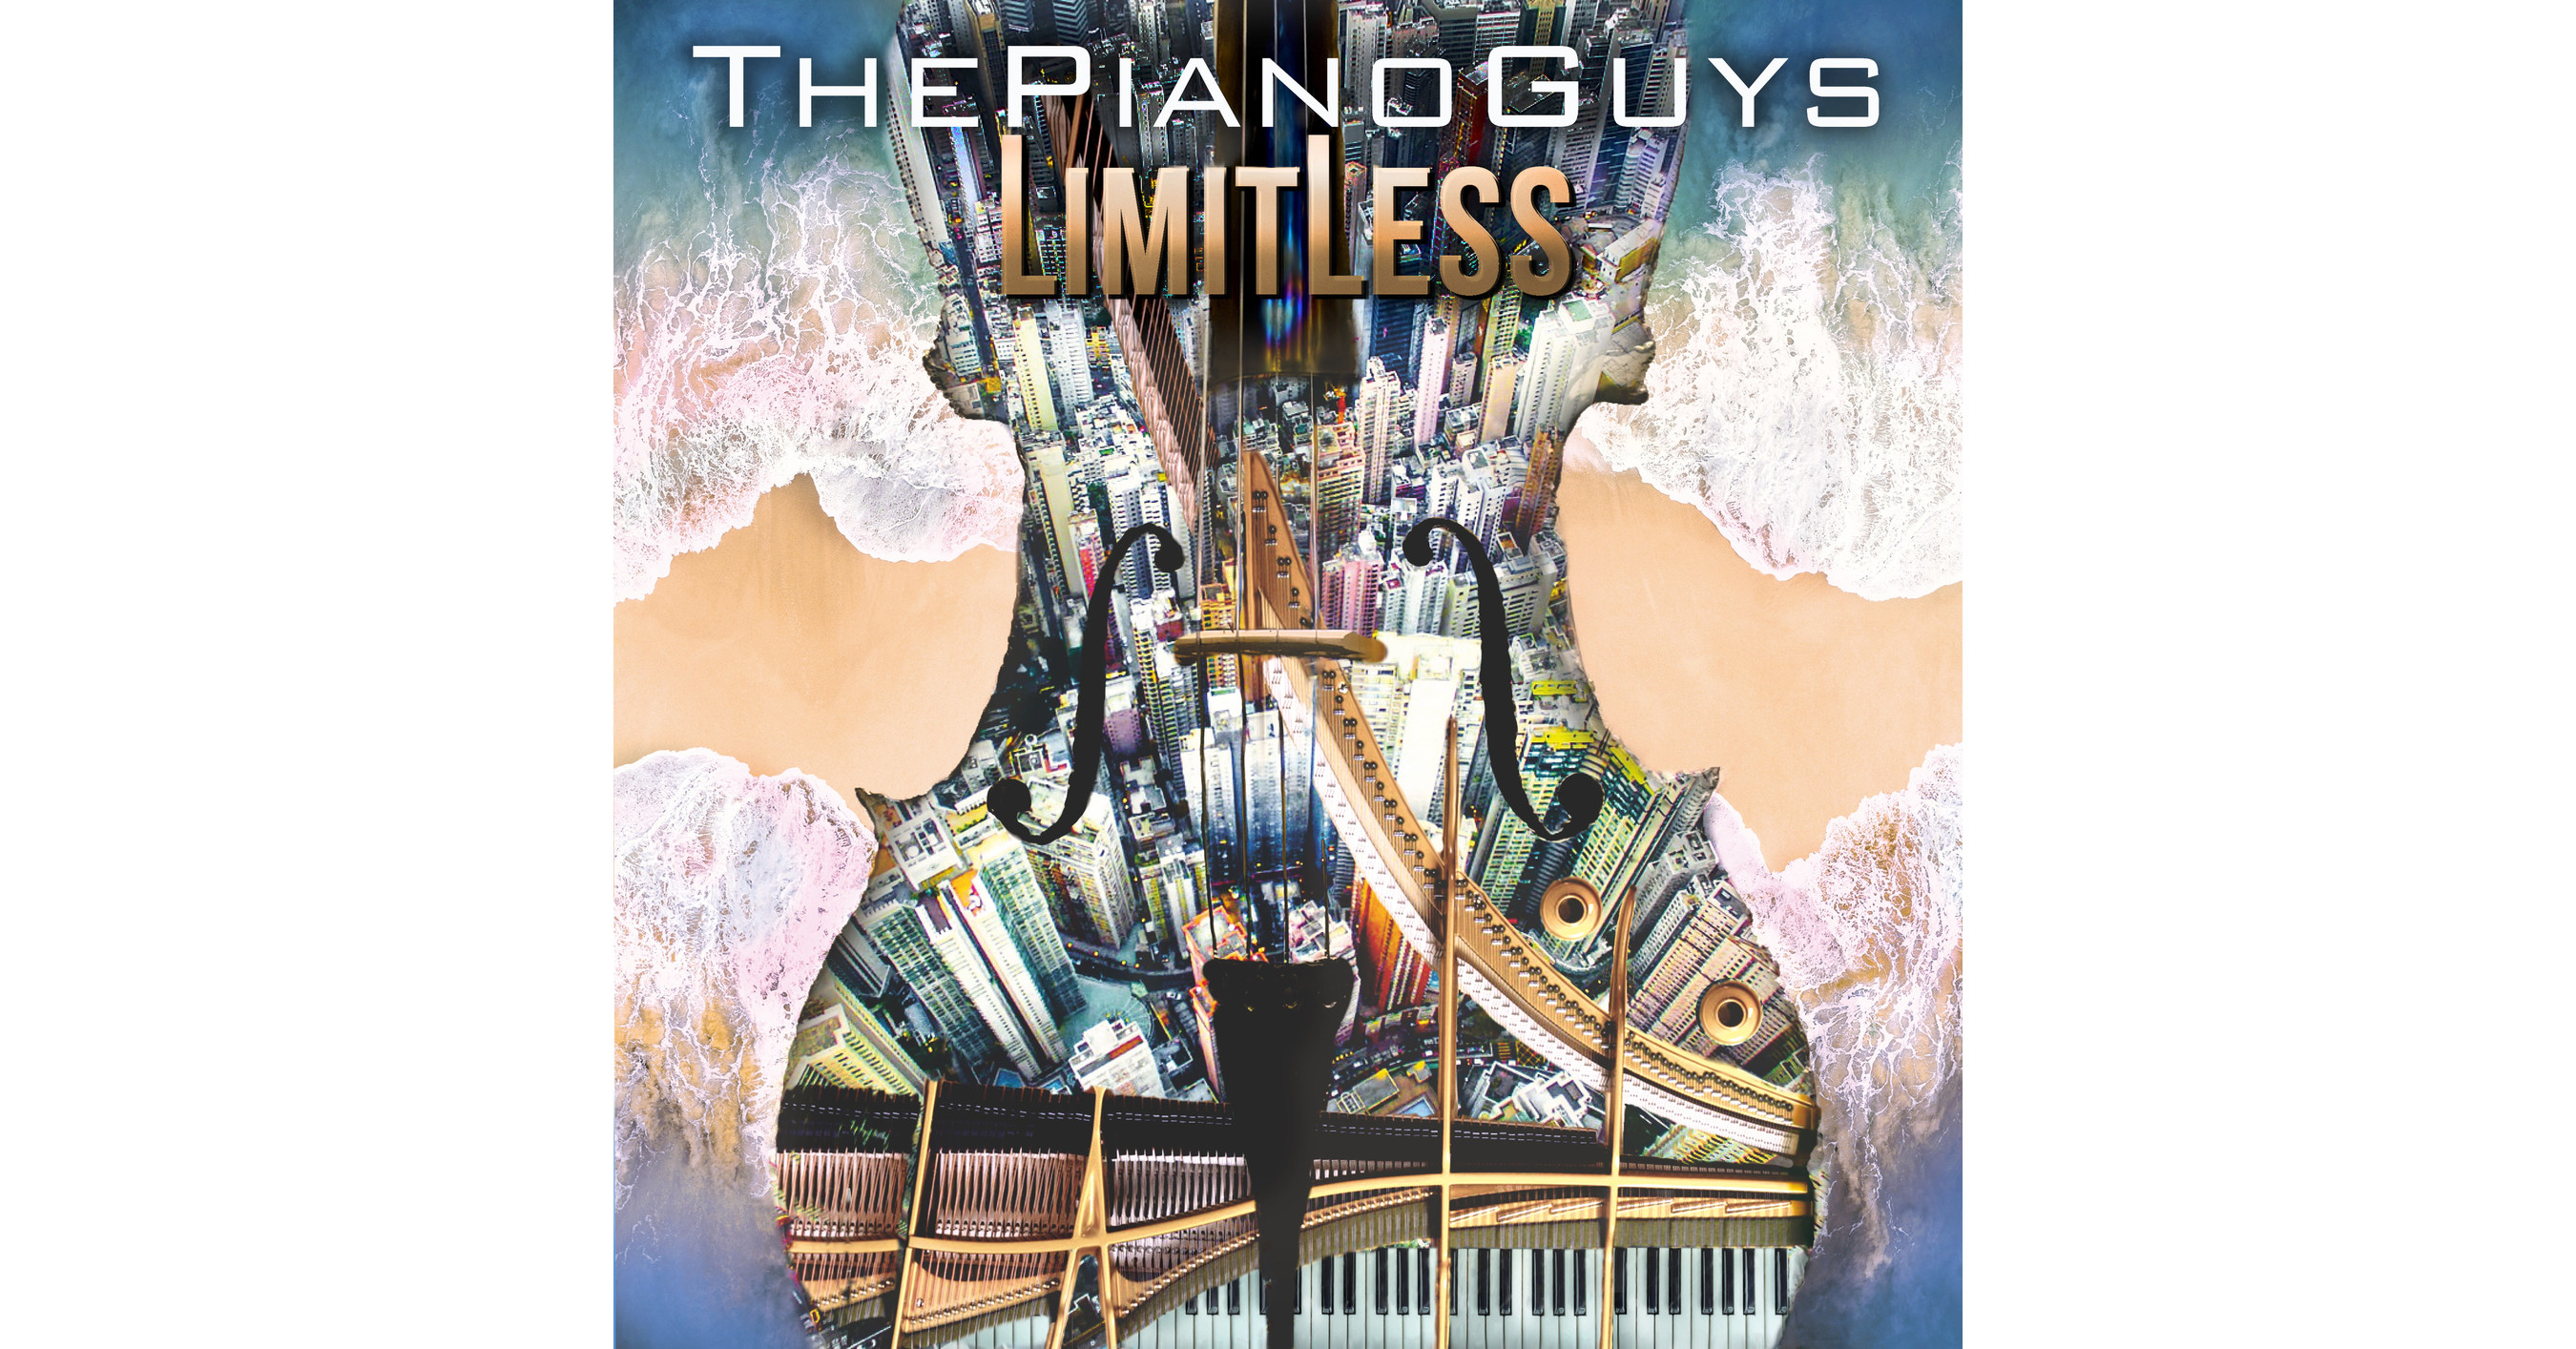 Piano guys limitless the Limitless by